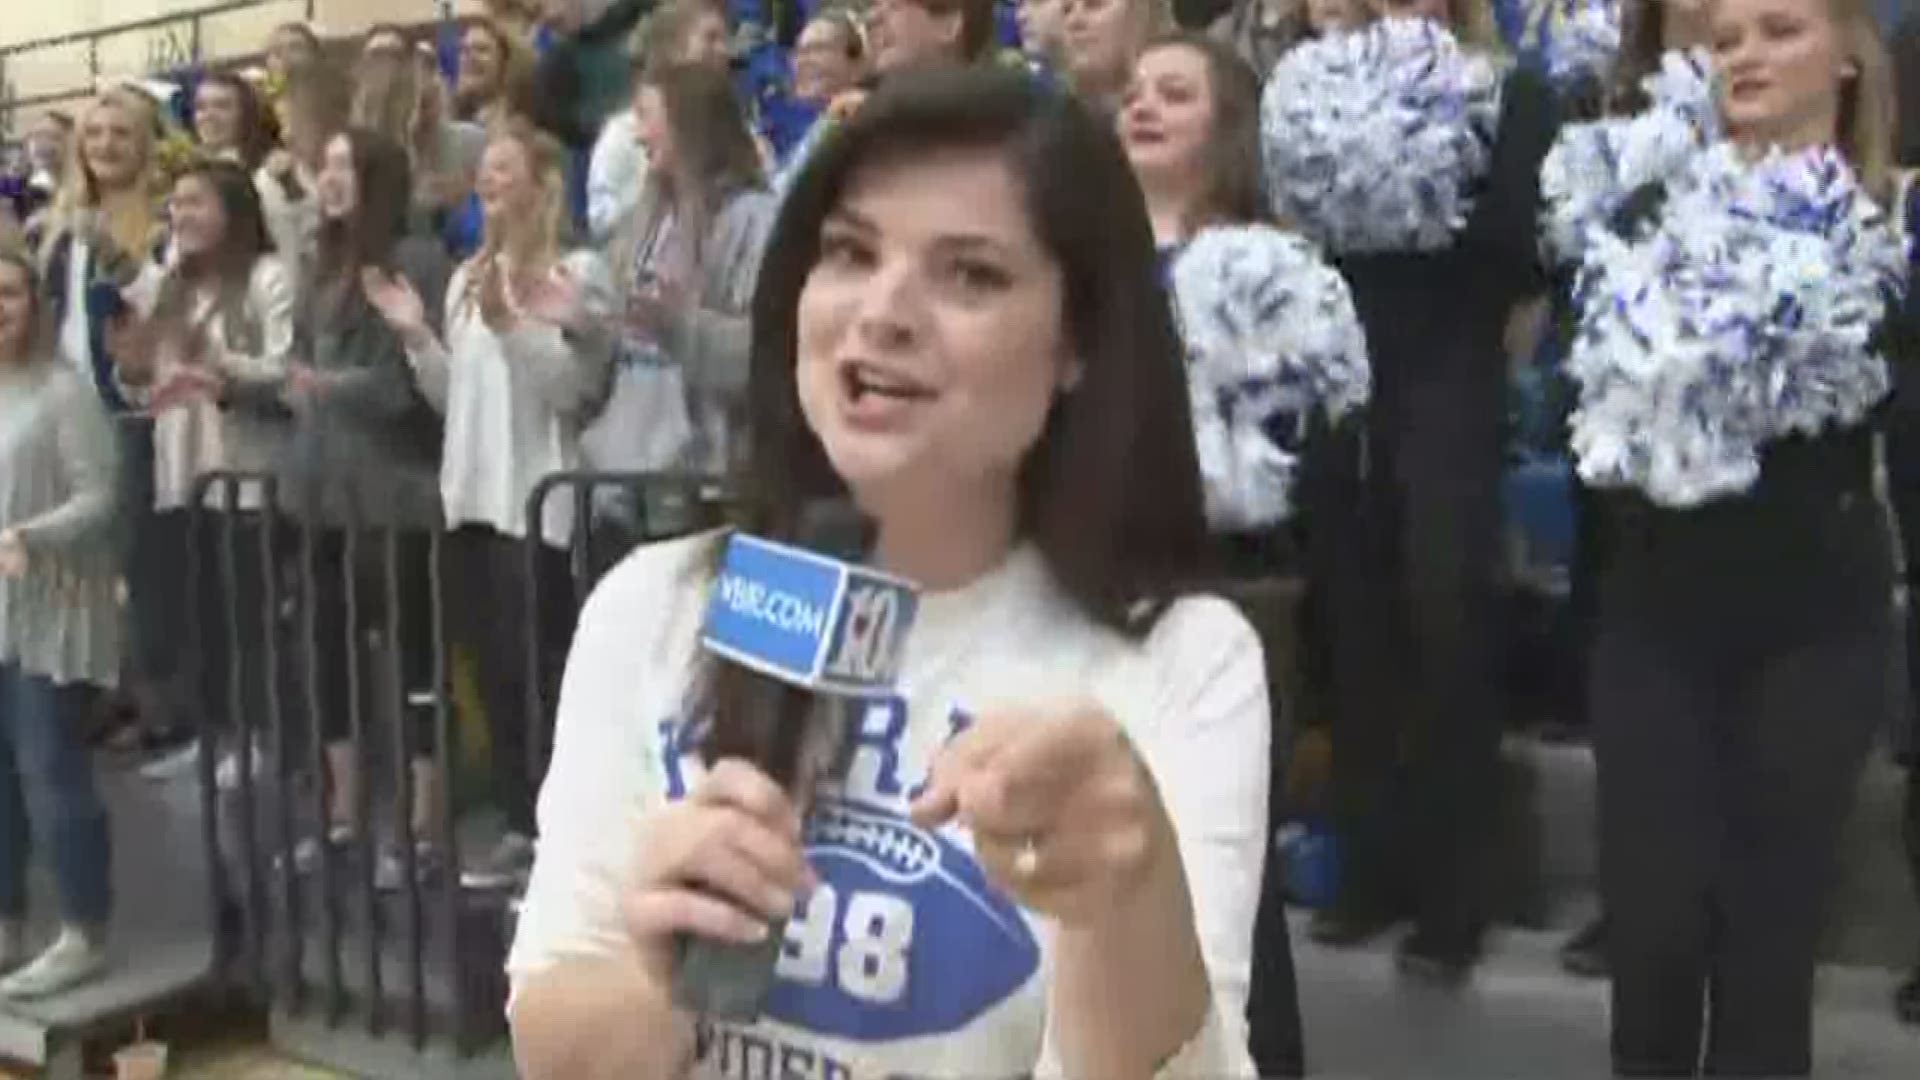 This morning we send it out to one of our favorite Karns alum-- Heather Waliga was at this morning's pep rally.